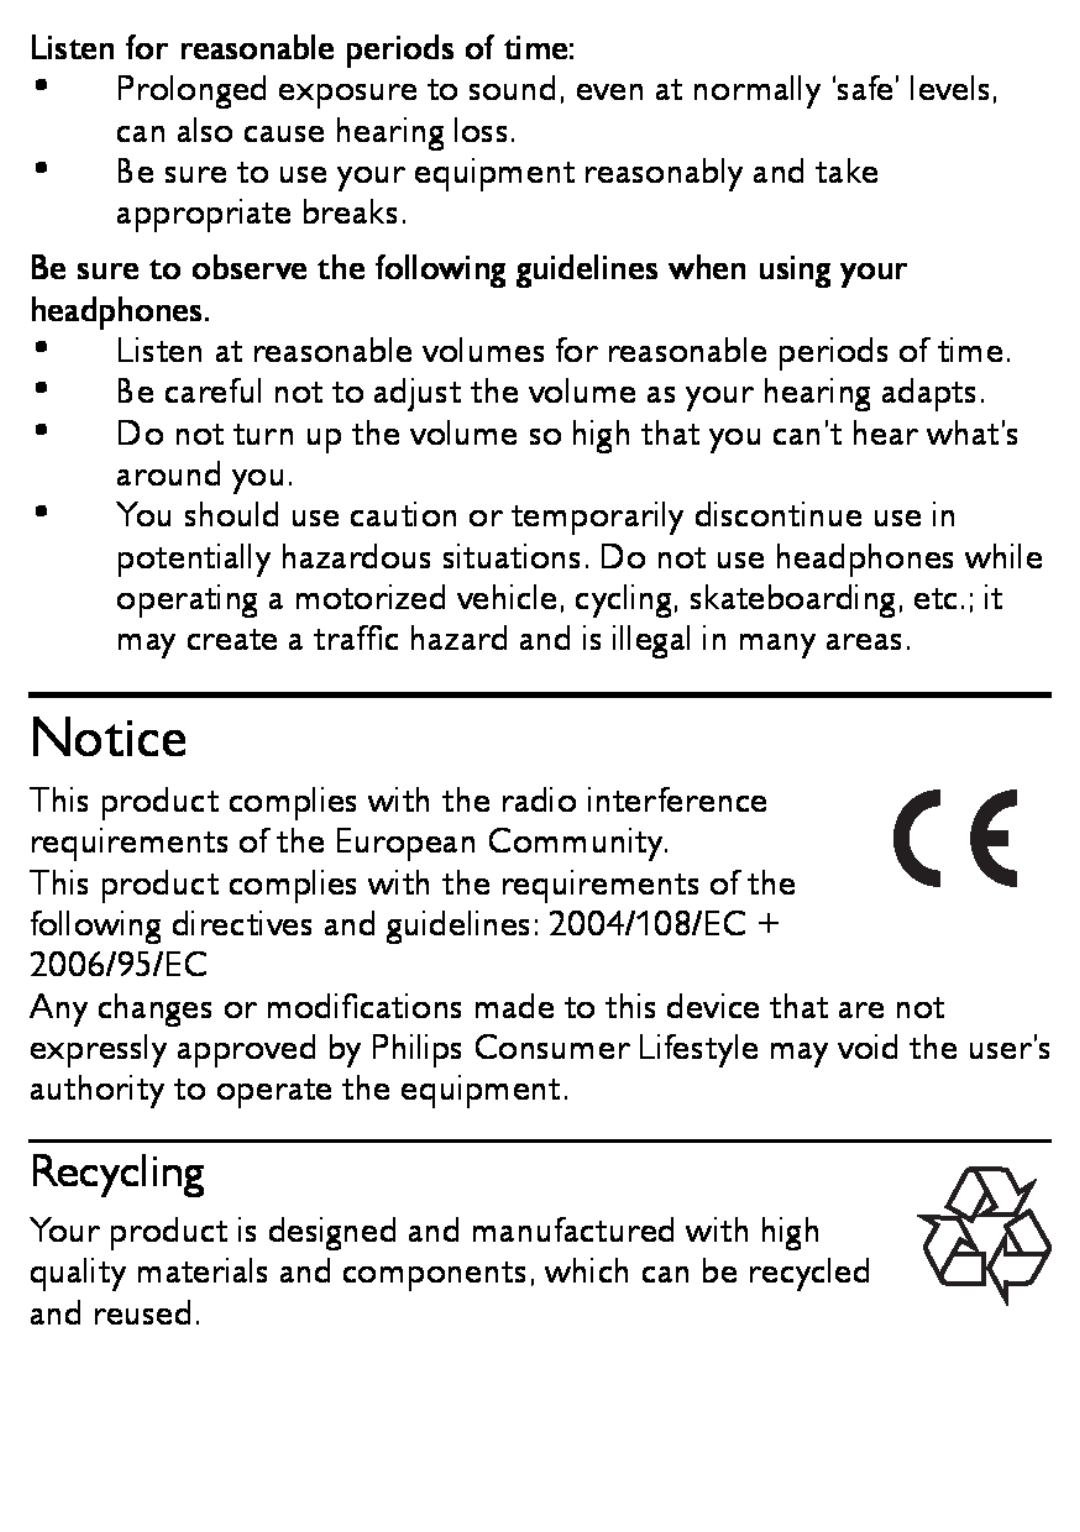 Philips MCM166 user manual Recycling 